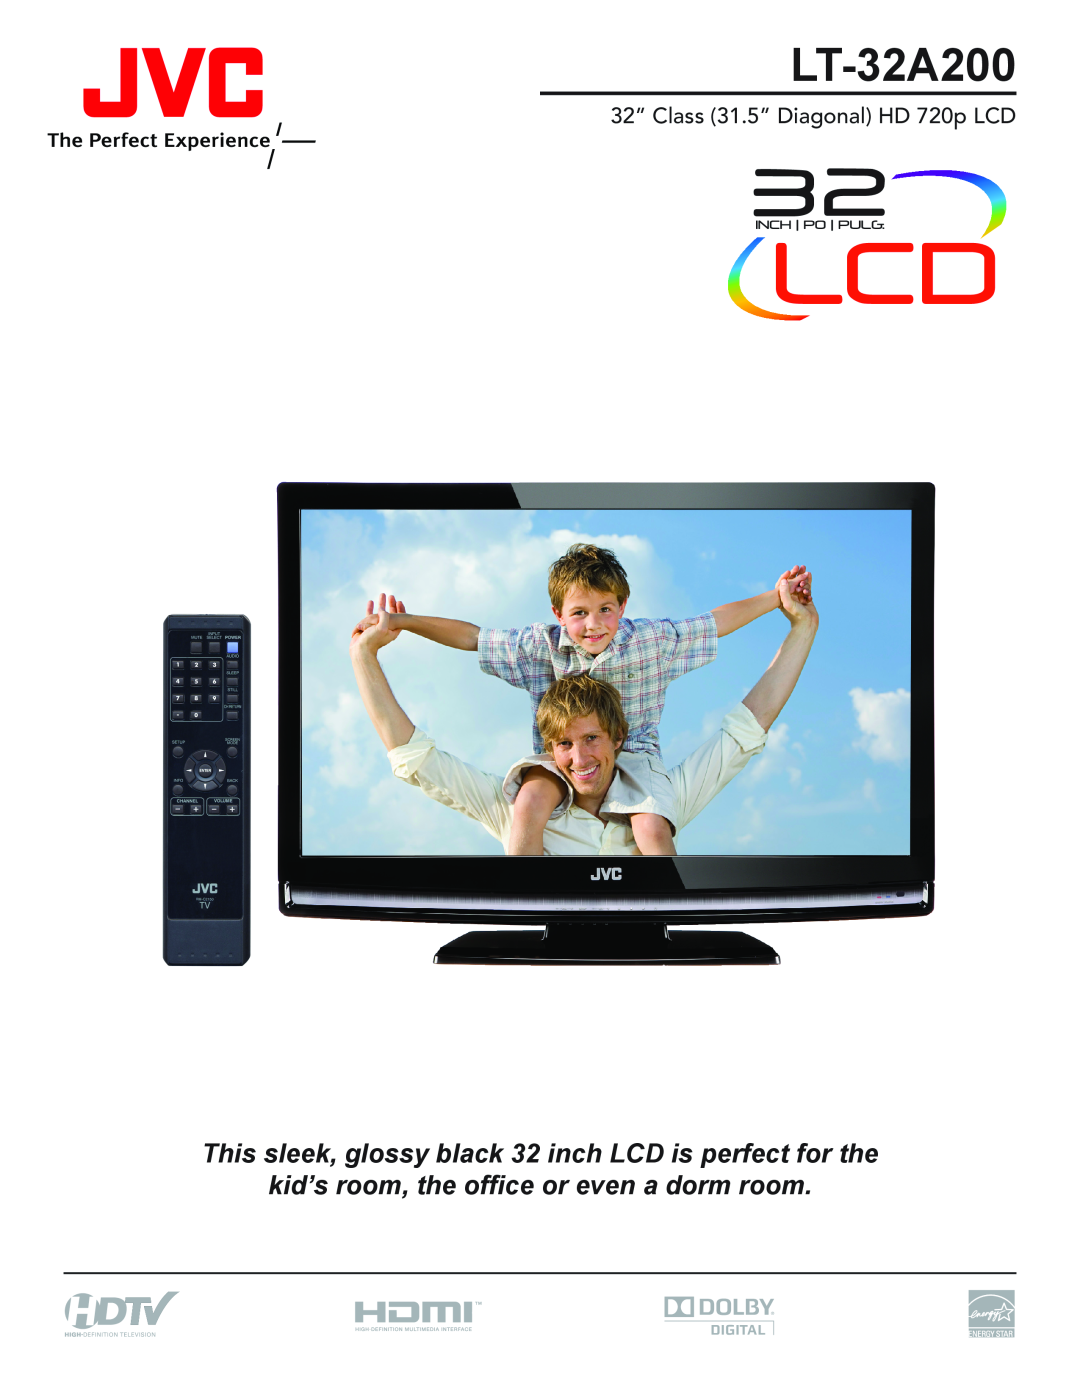 JVC LT-32A200 manual This sleek, glossy black 32 inch LCD is perfect for the, kid’s room, the office or even a dorm room 